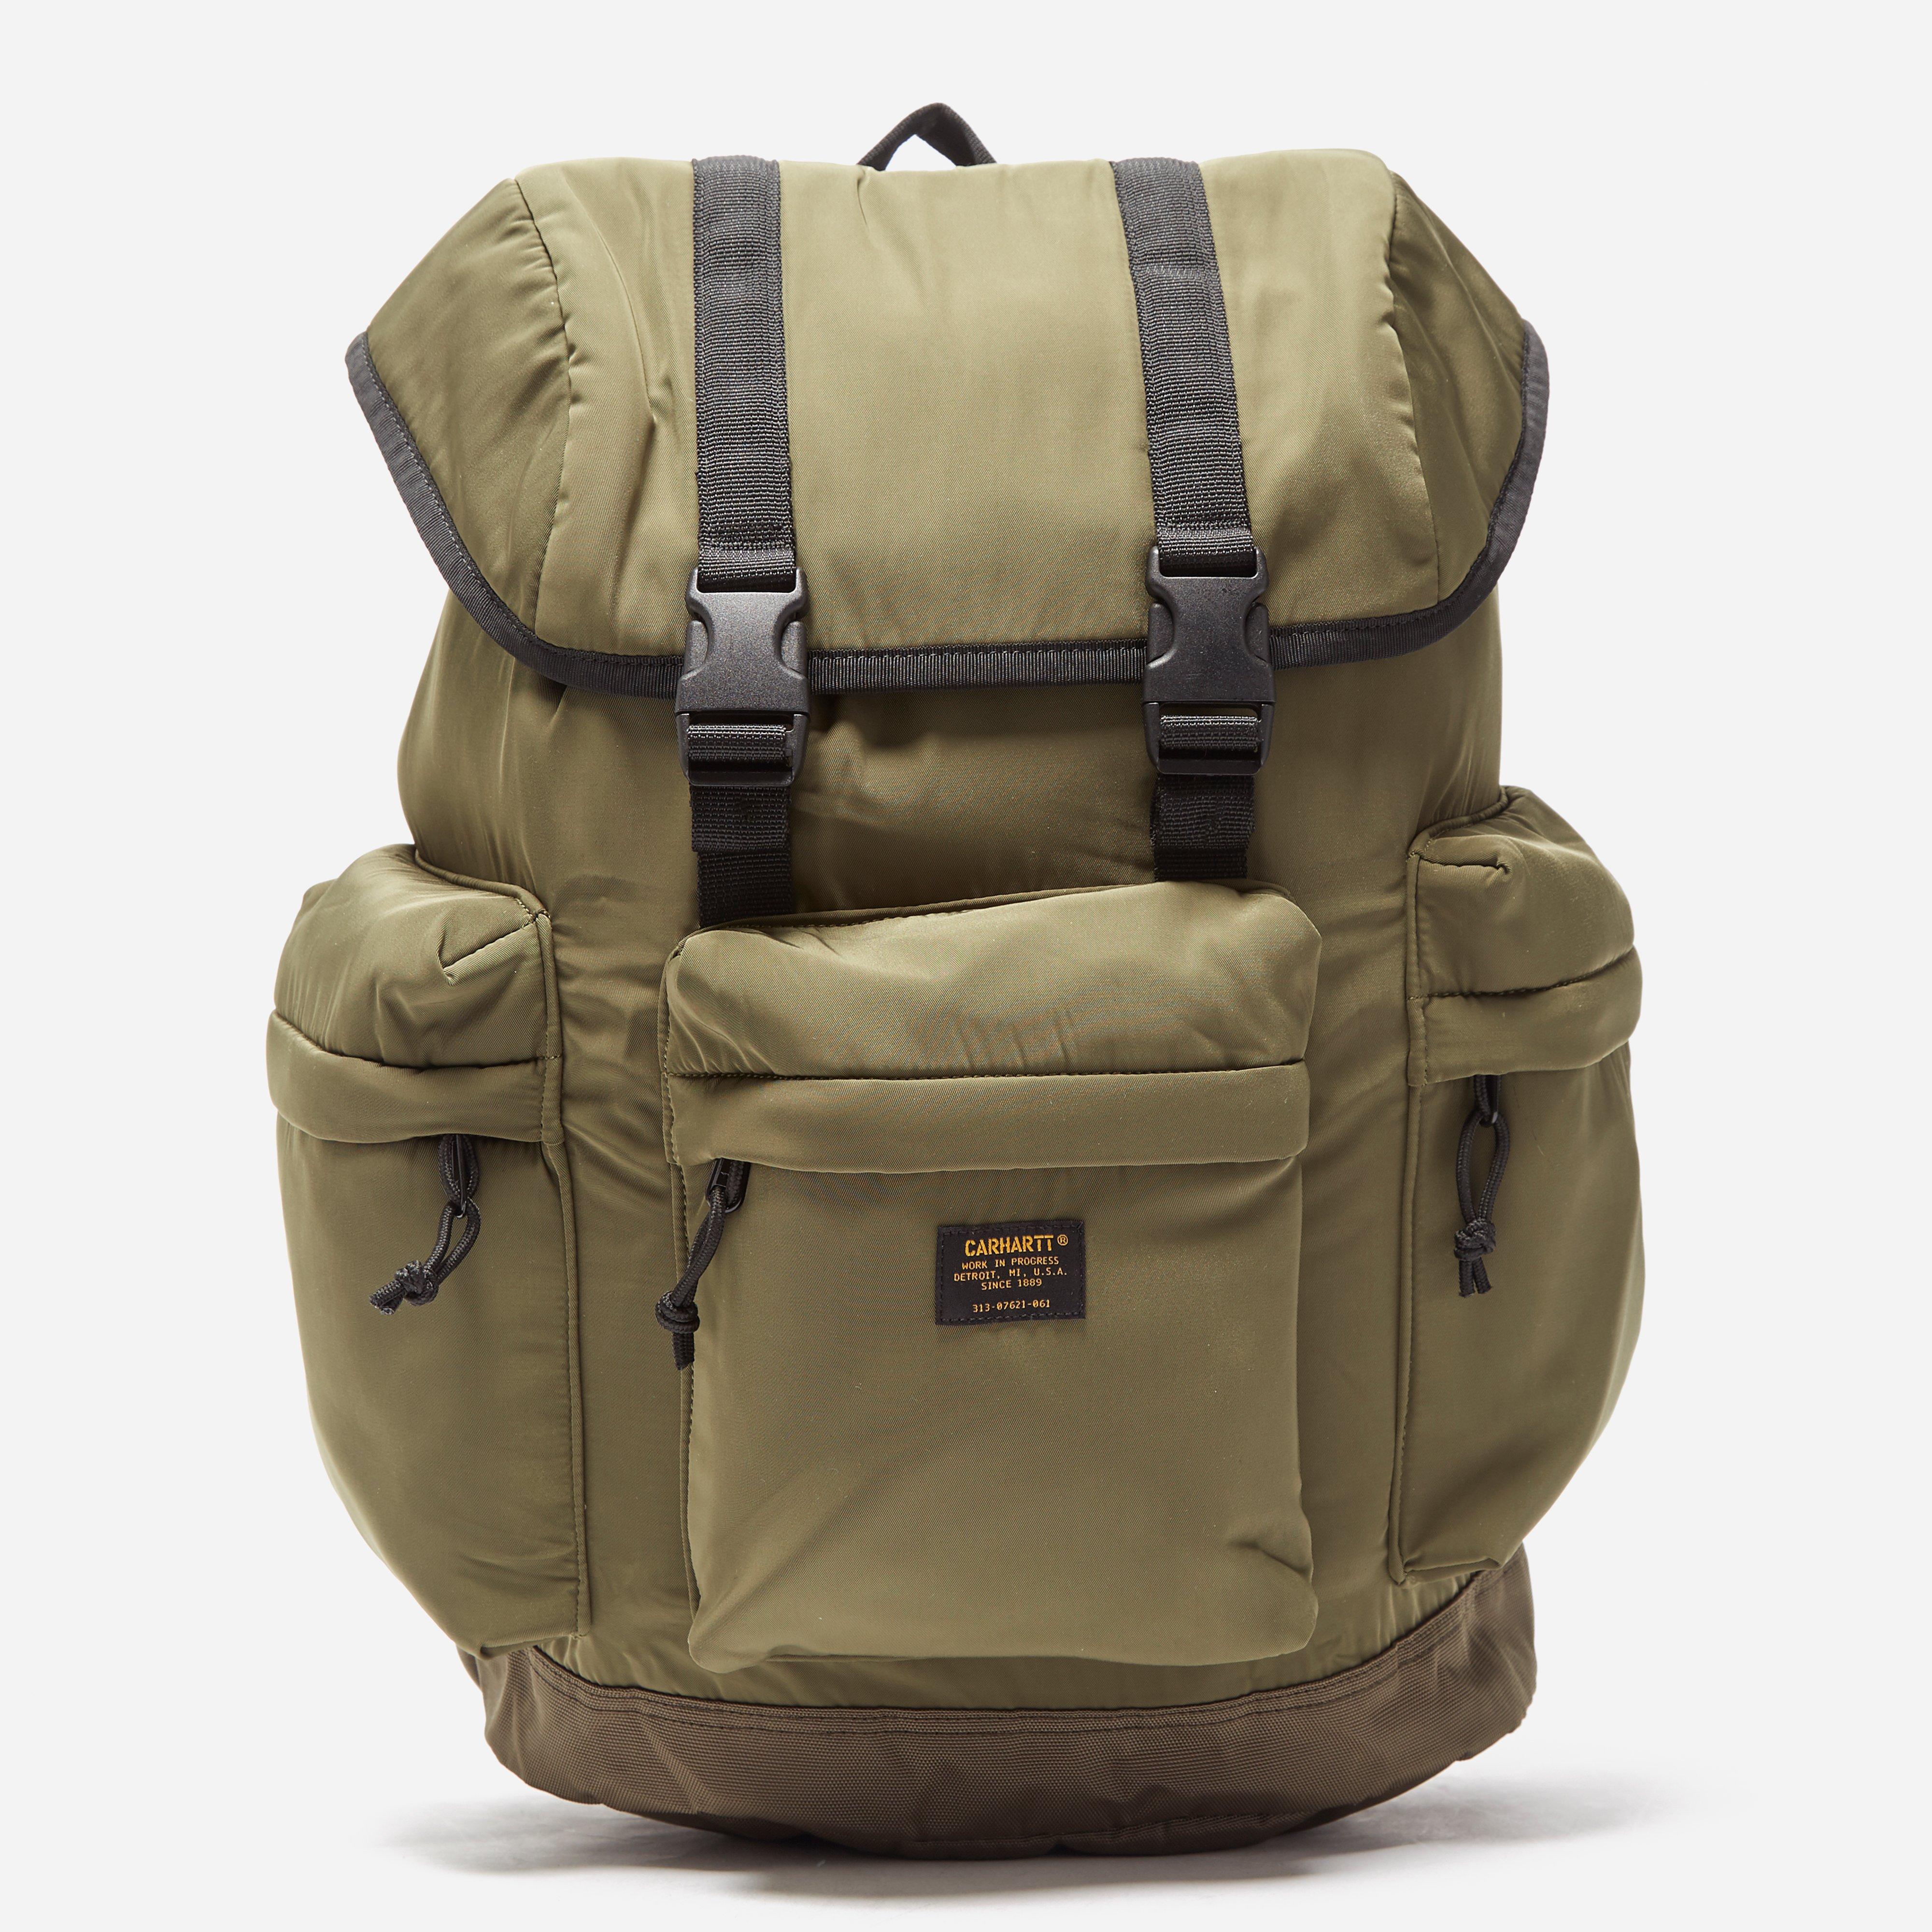 Carhartt WIP Synthetic Carhartt Military Backpack in Green for Men - Lyst